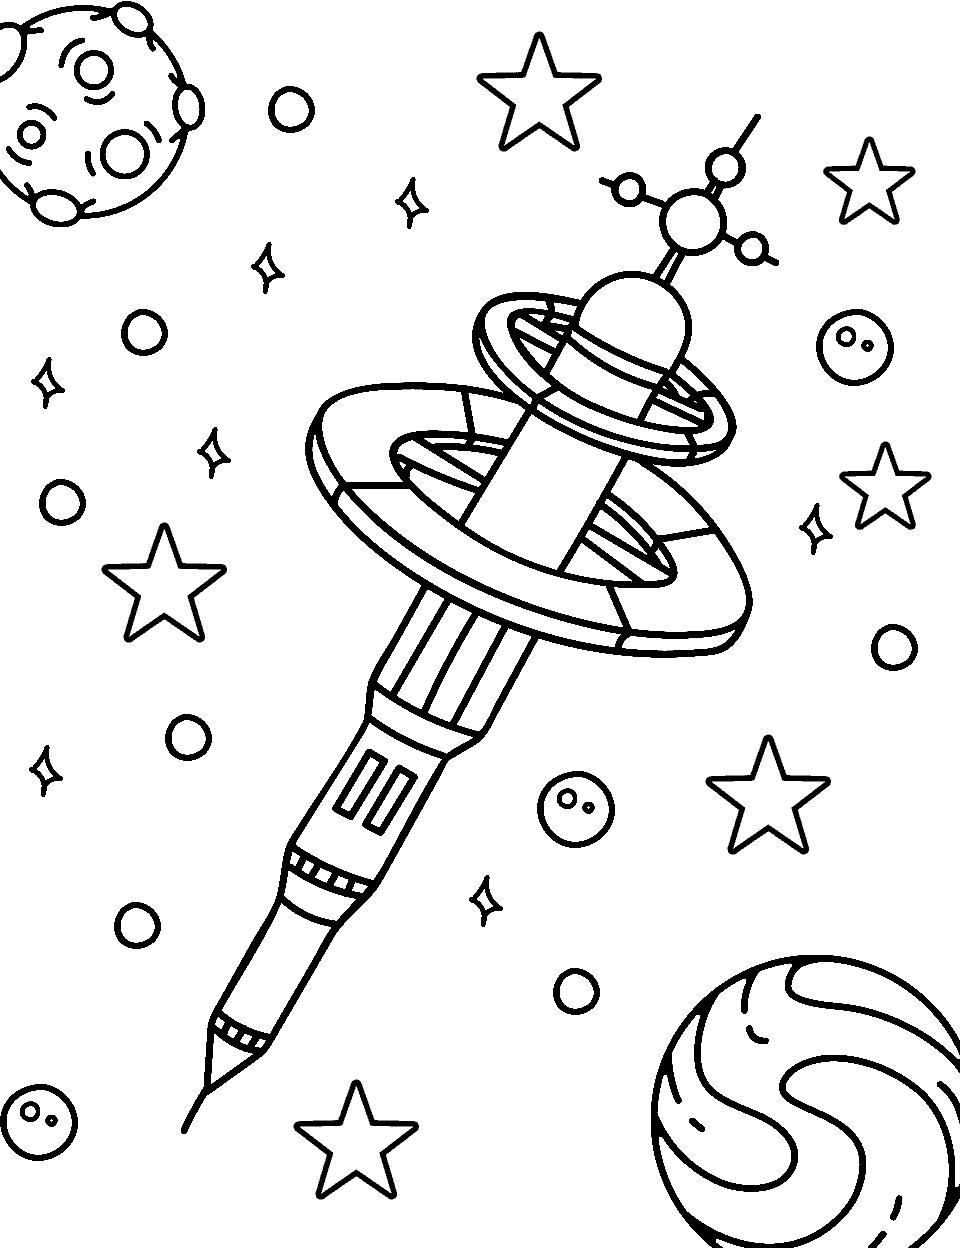 Floating Space Station Coloring Page - A space station hovering amidst a backdrop of stars.